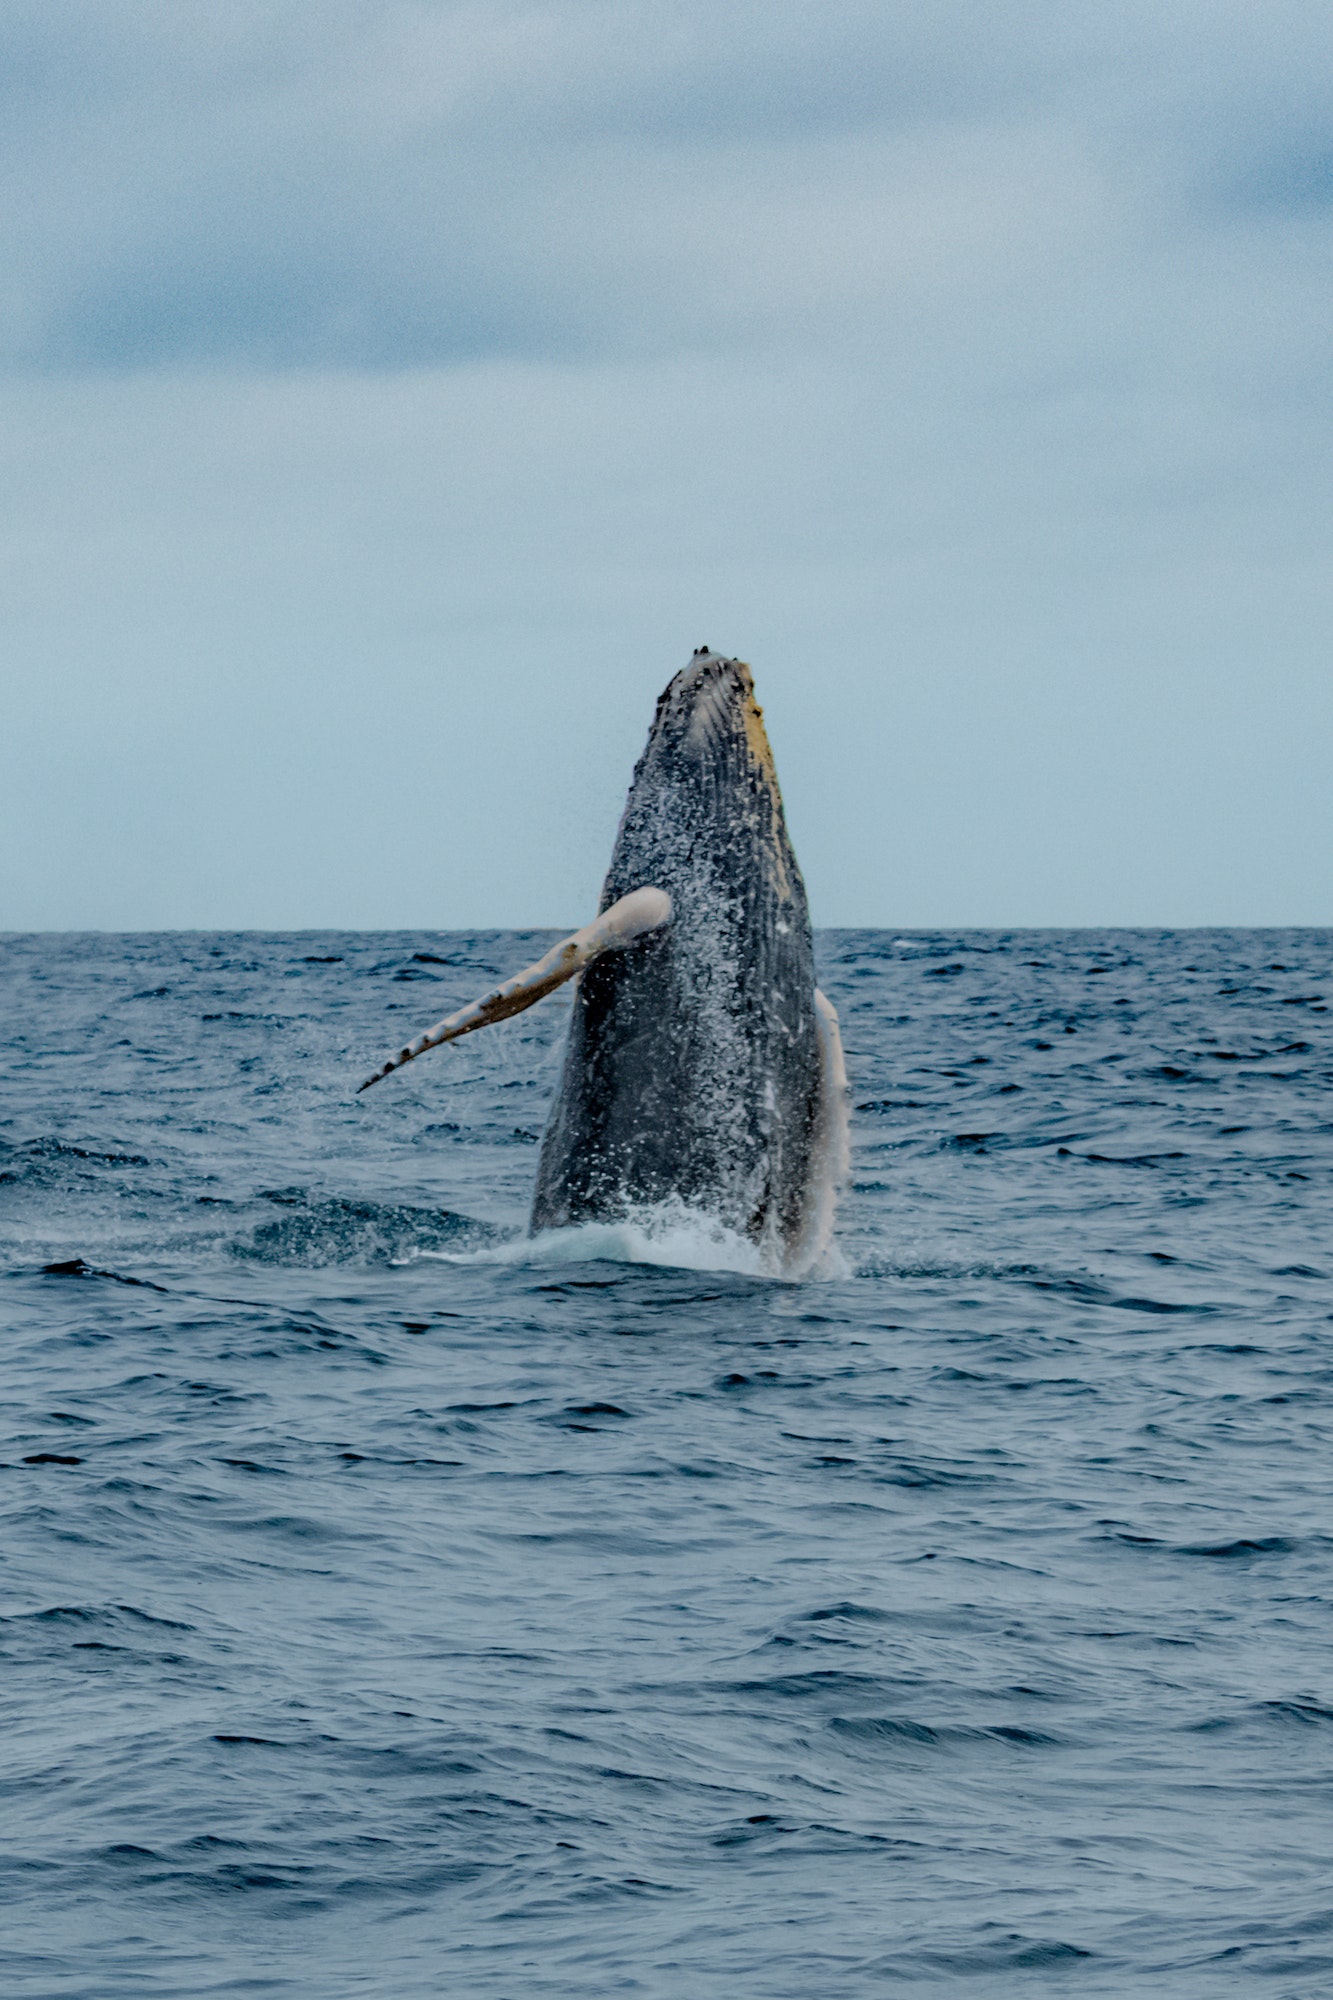 Vertical shot of a Gray whale leaping from the water